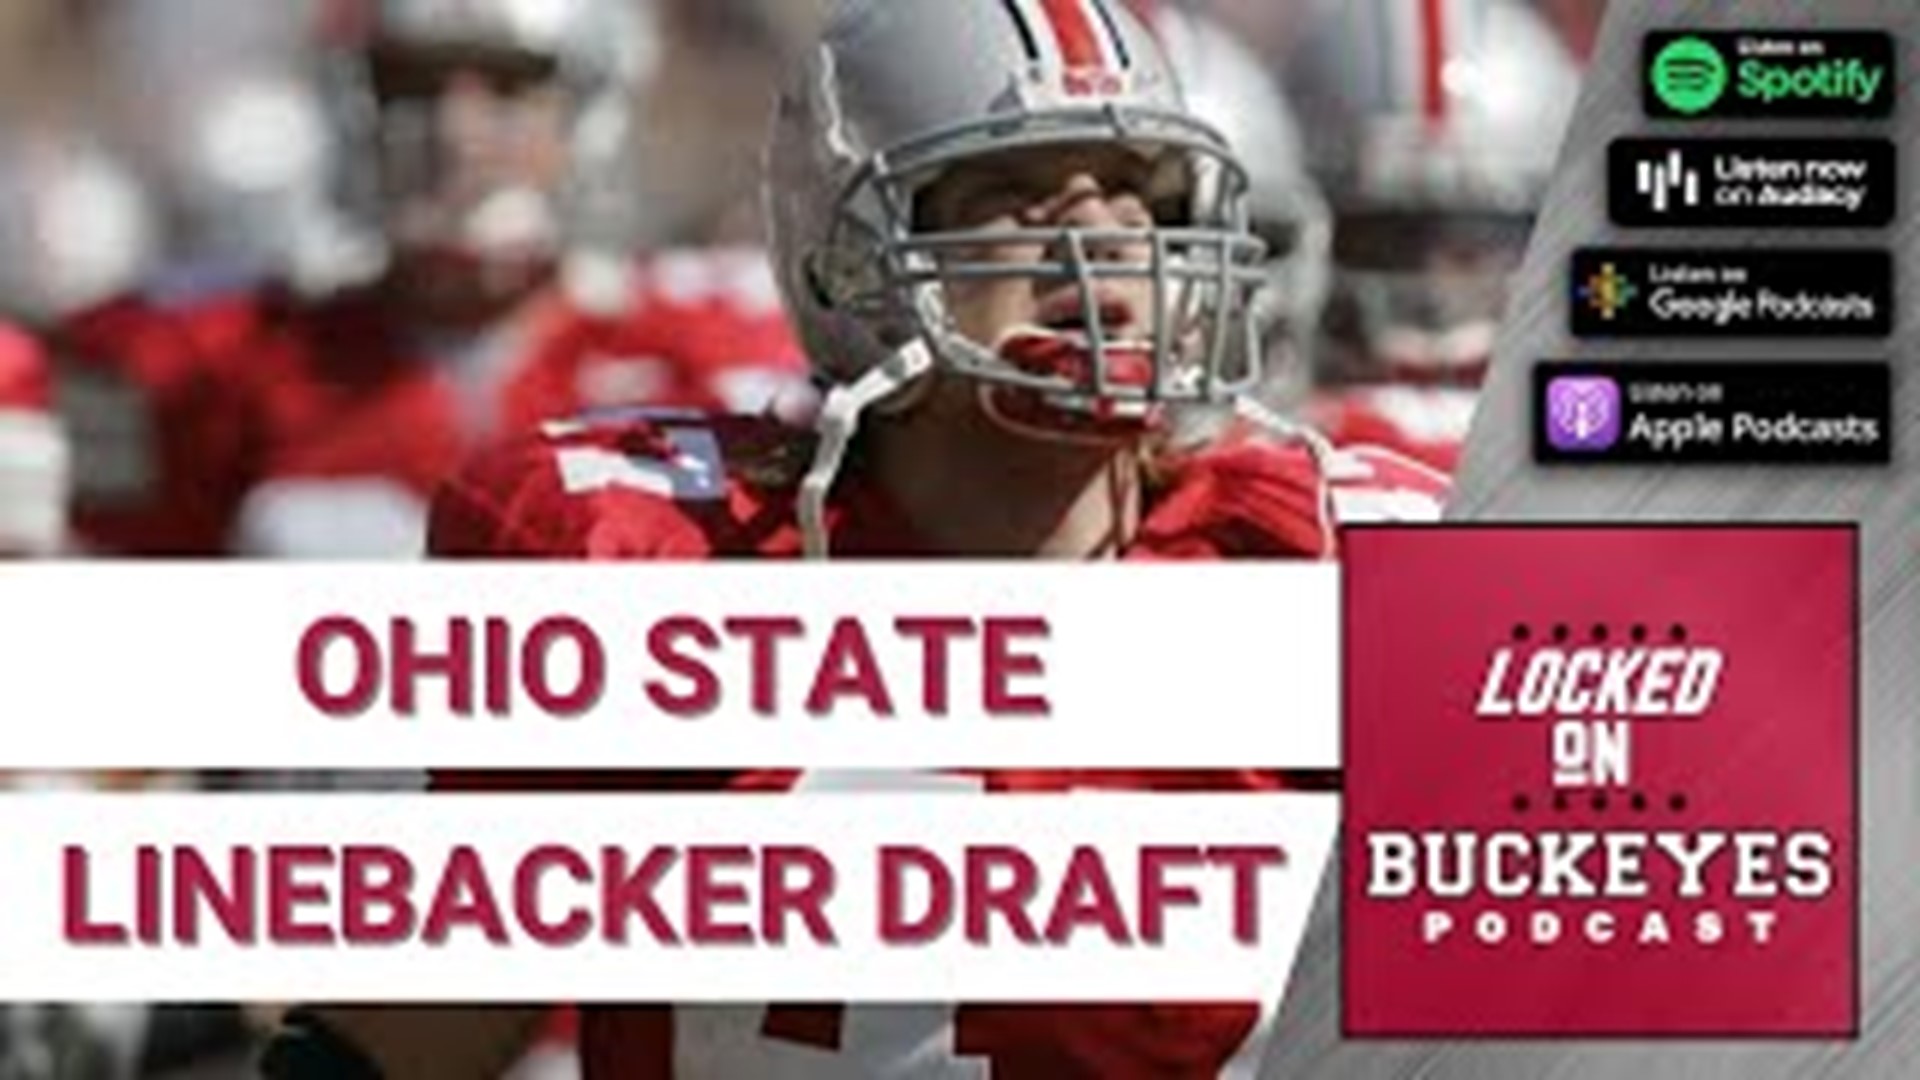 The Ohio State Buckeyes have been fortunate to have elite linebacker play for decades.